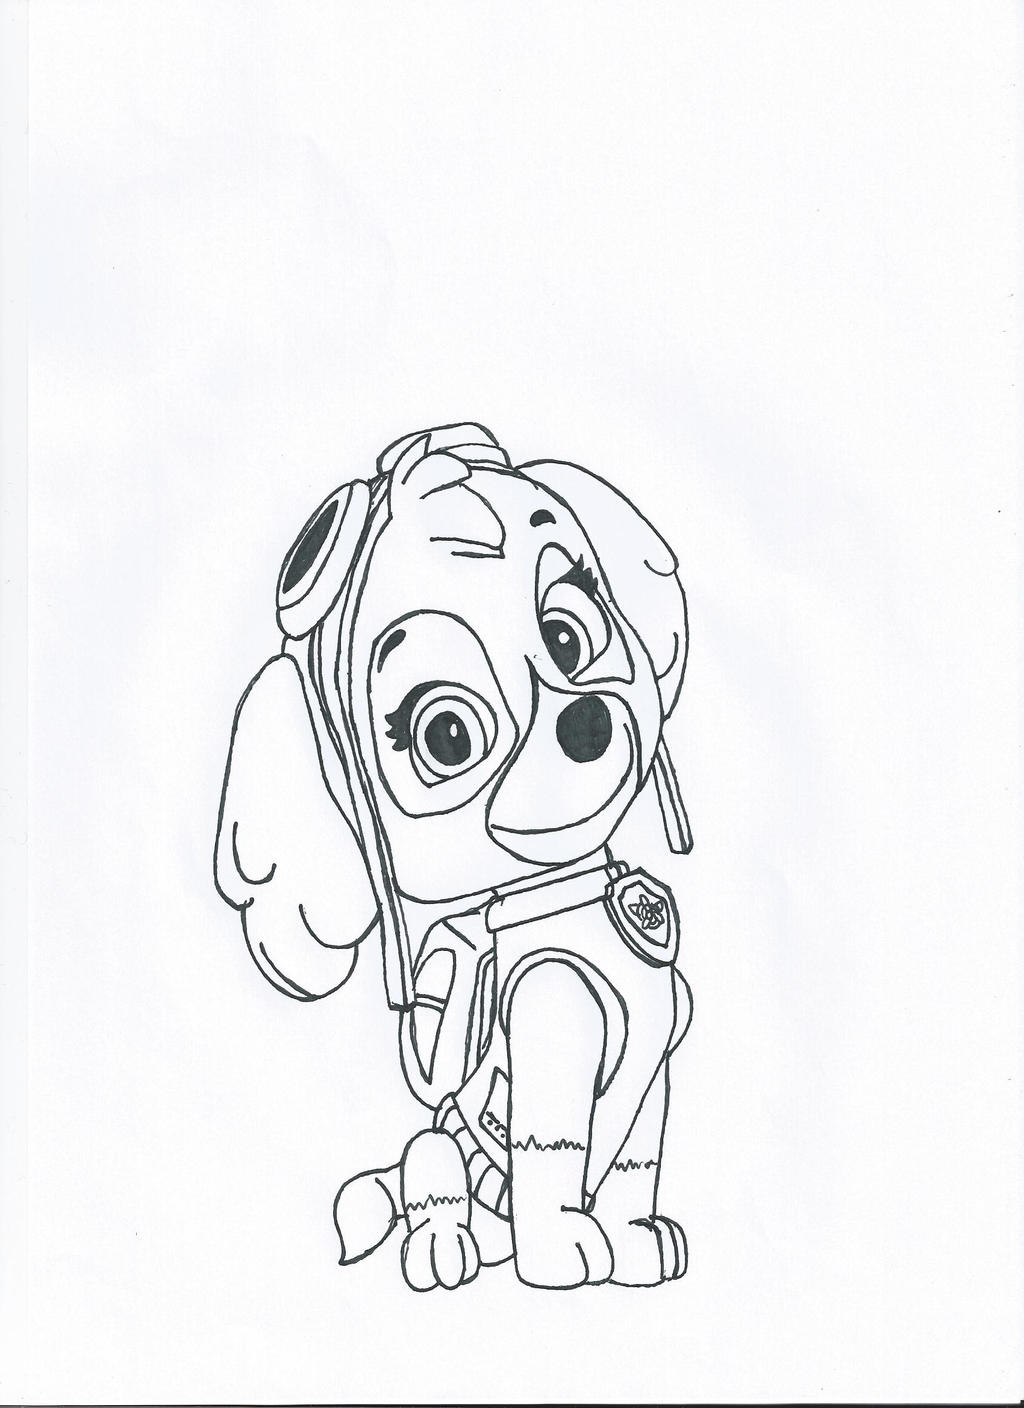 skye from paw patrol  free colouring pages